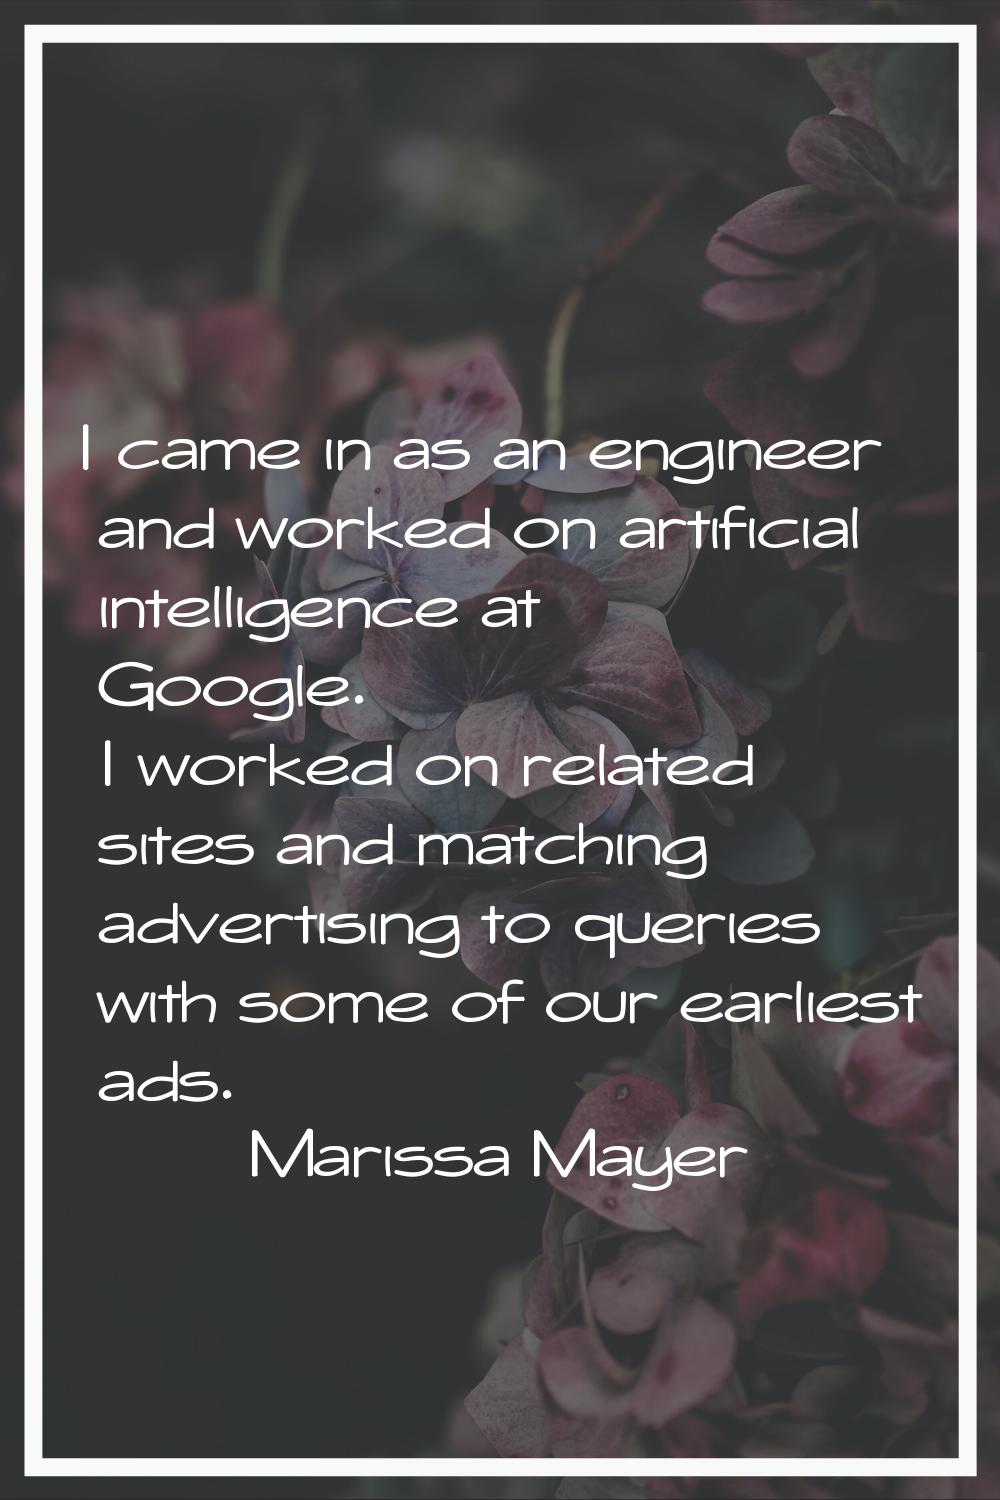 I came in as an engineer and worked on artificial intelligence at Google. I worked on related sites